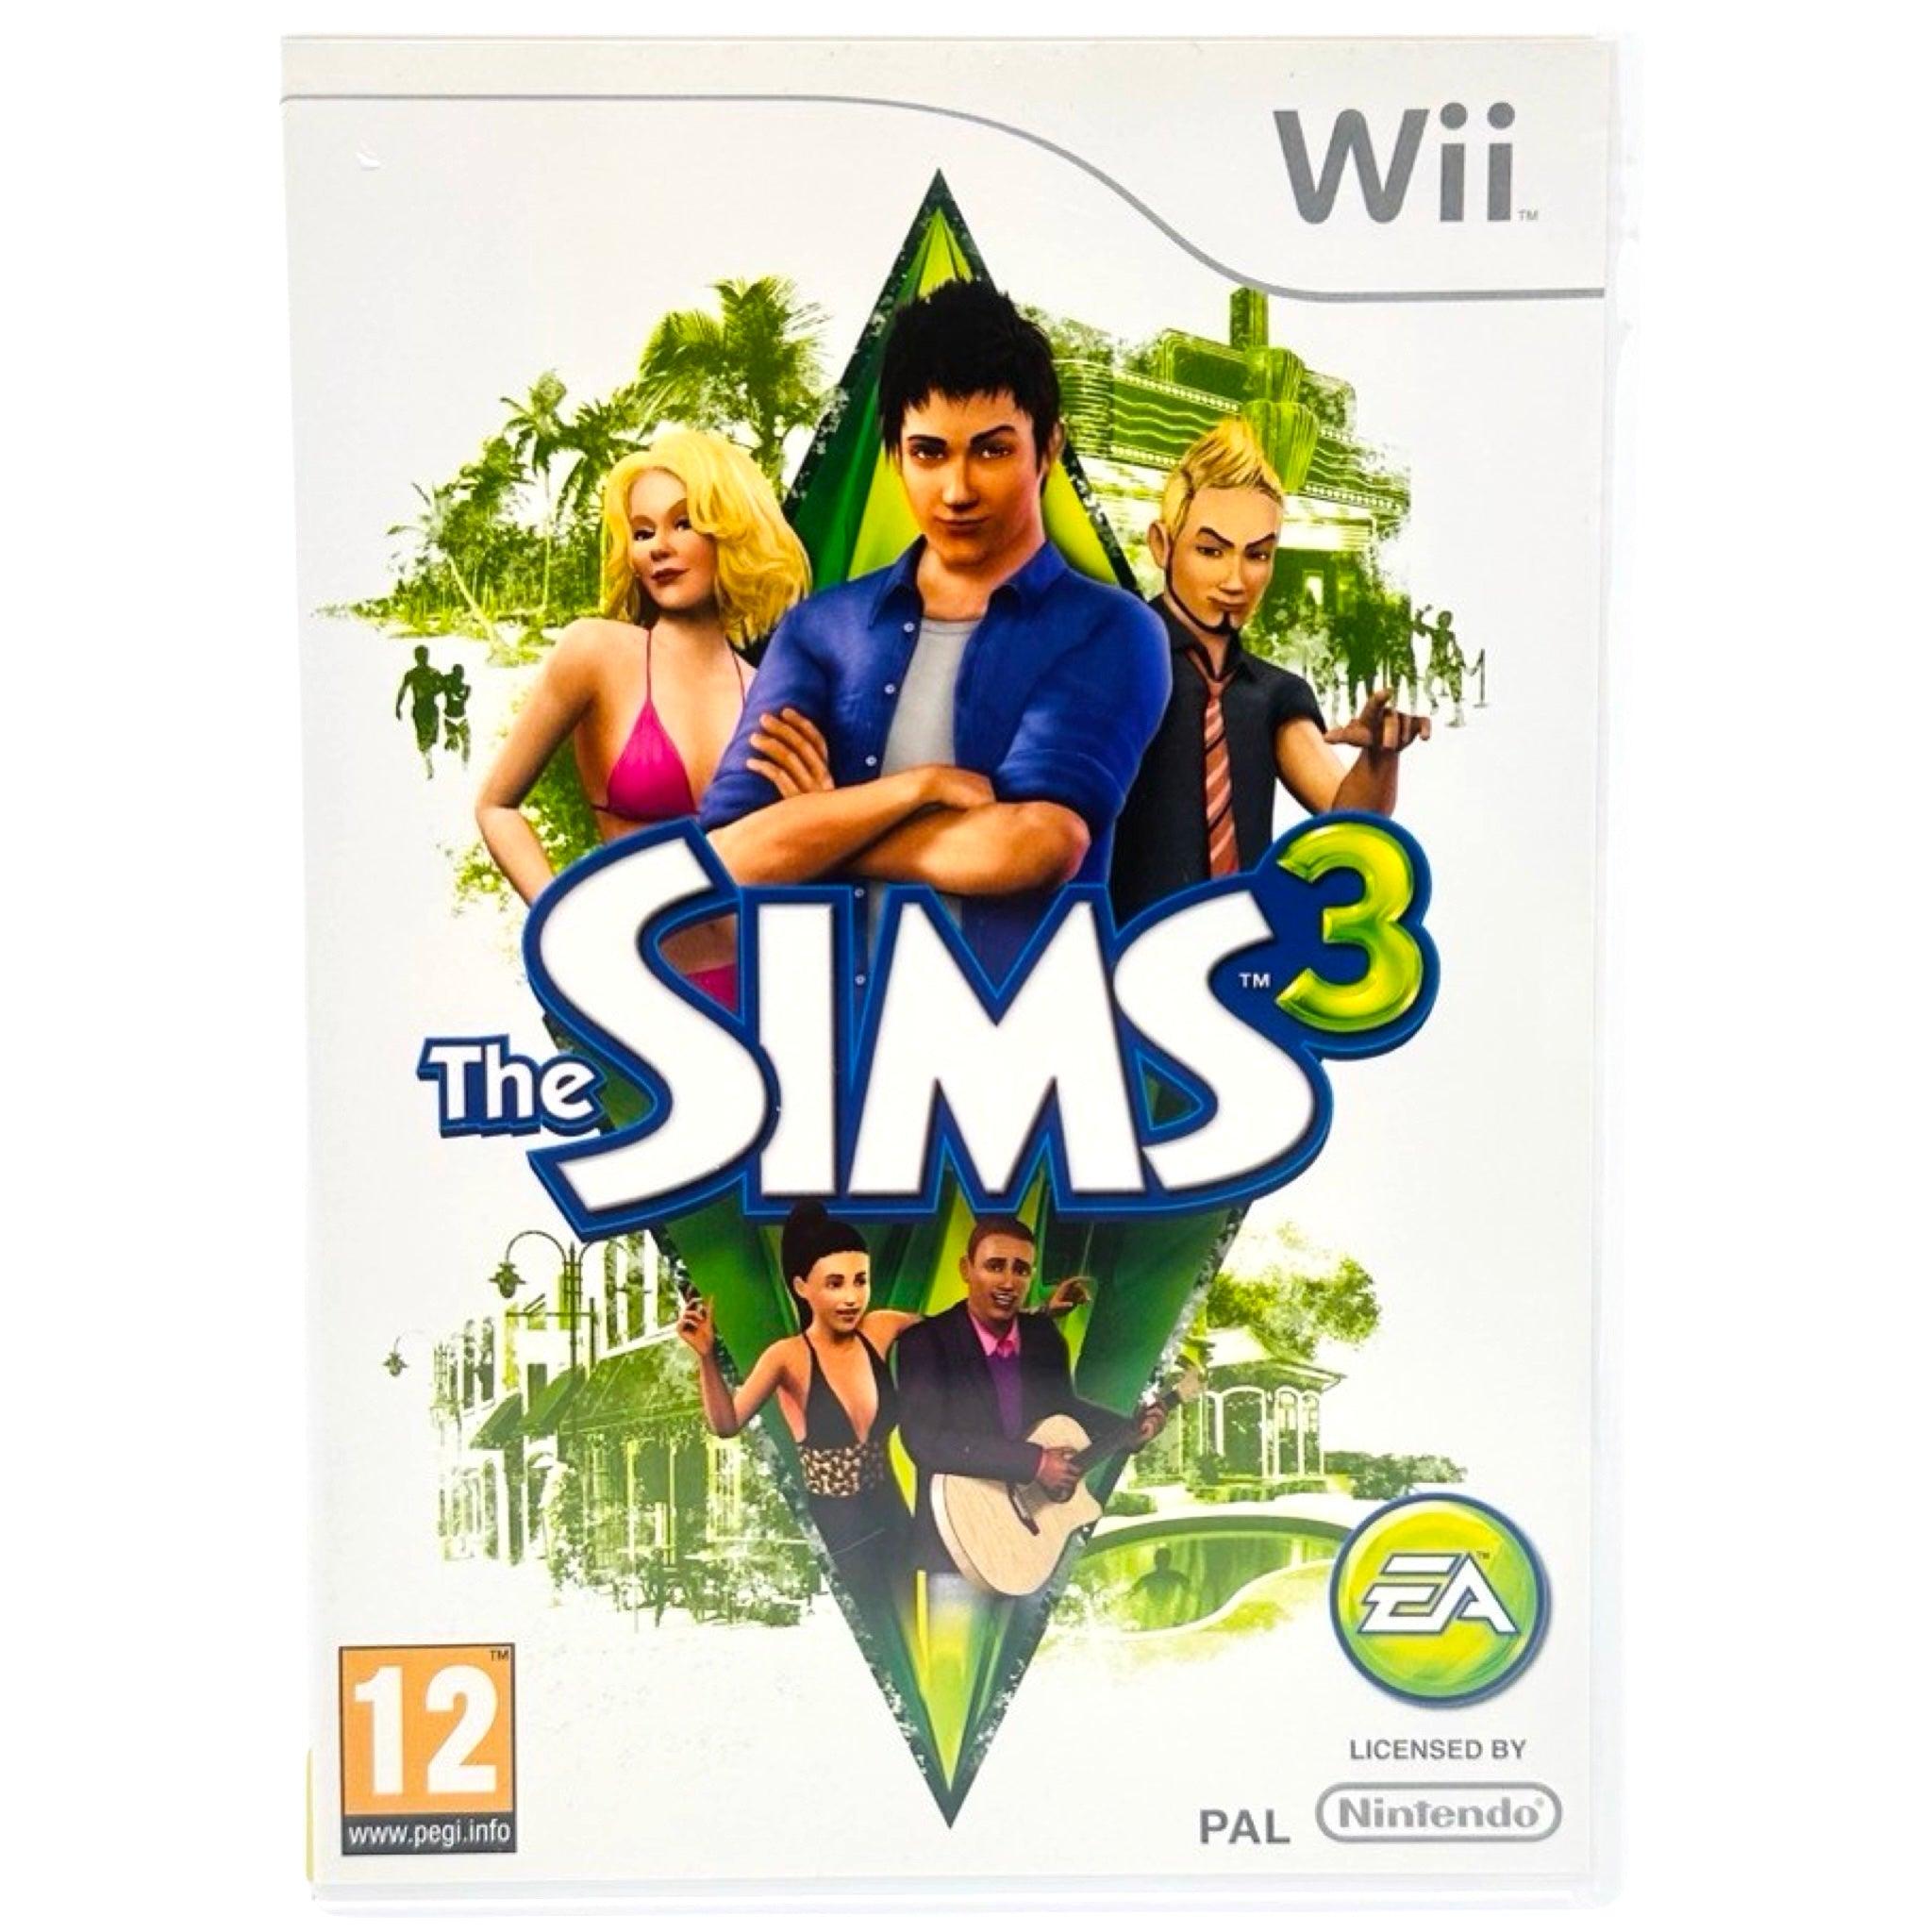 Wii: The Sims 3 - RetroGaming.no